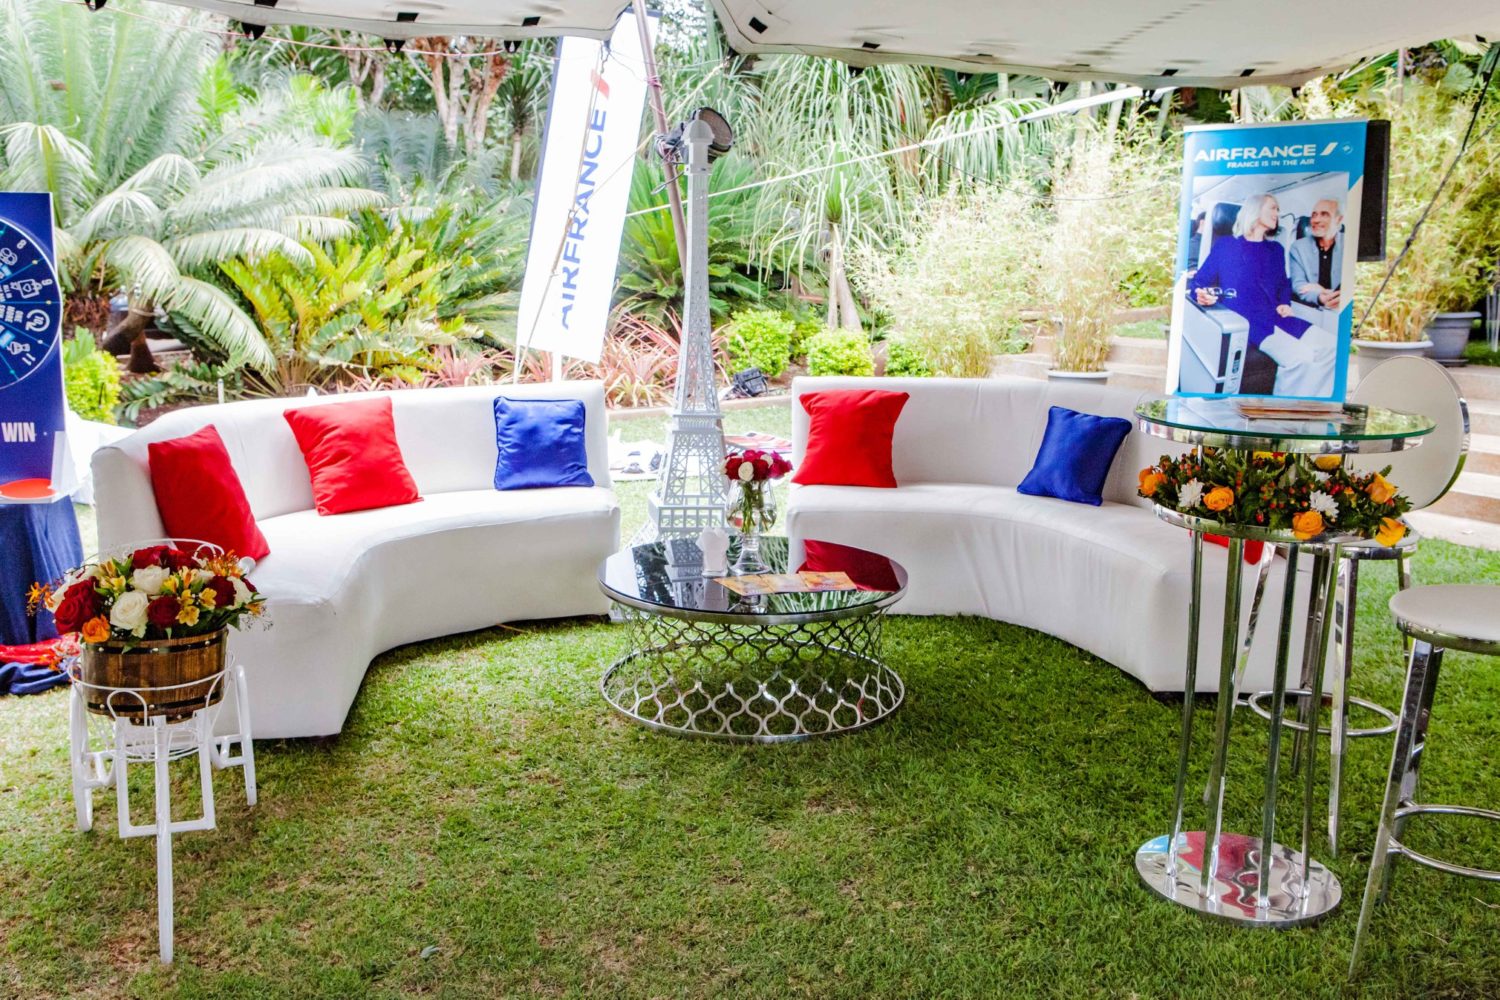 Inside the 2019 Nairobi Fashion High Tea, Where the Decor Was Designed to Surprise and Delight